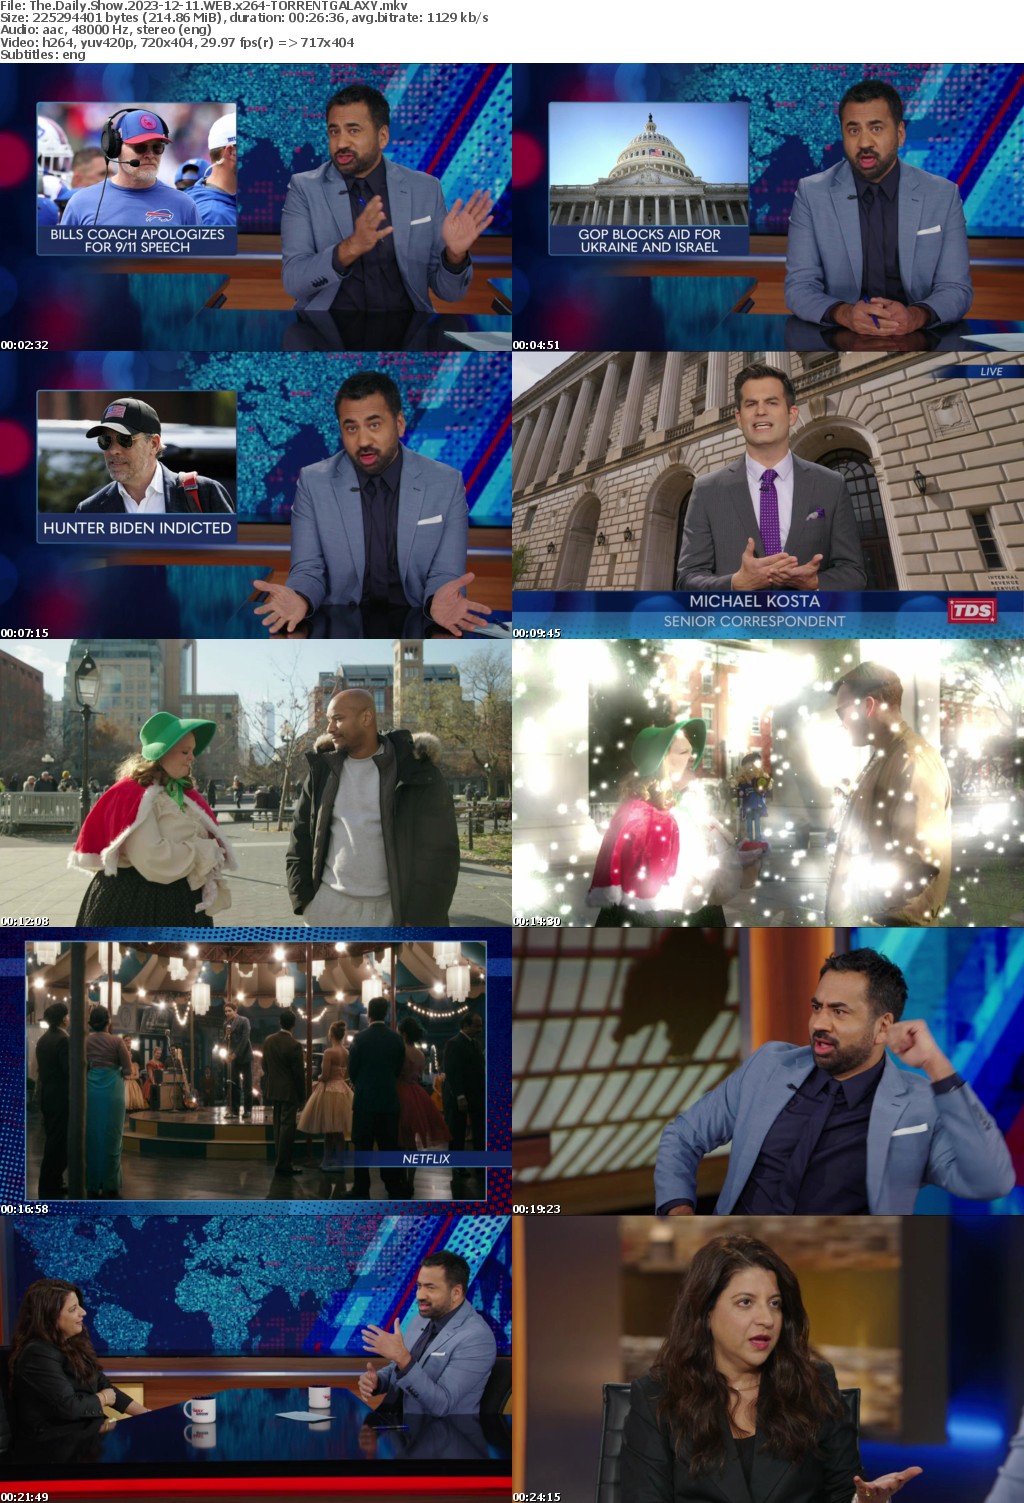 The Daily Show 2023-12-11 WEB x264-GALAXY